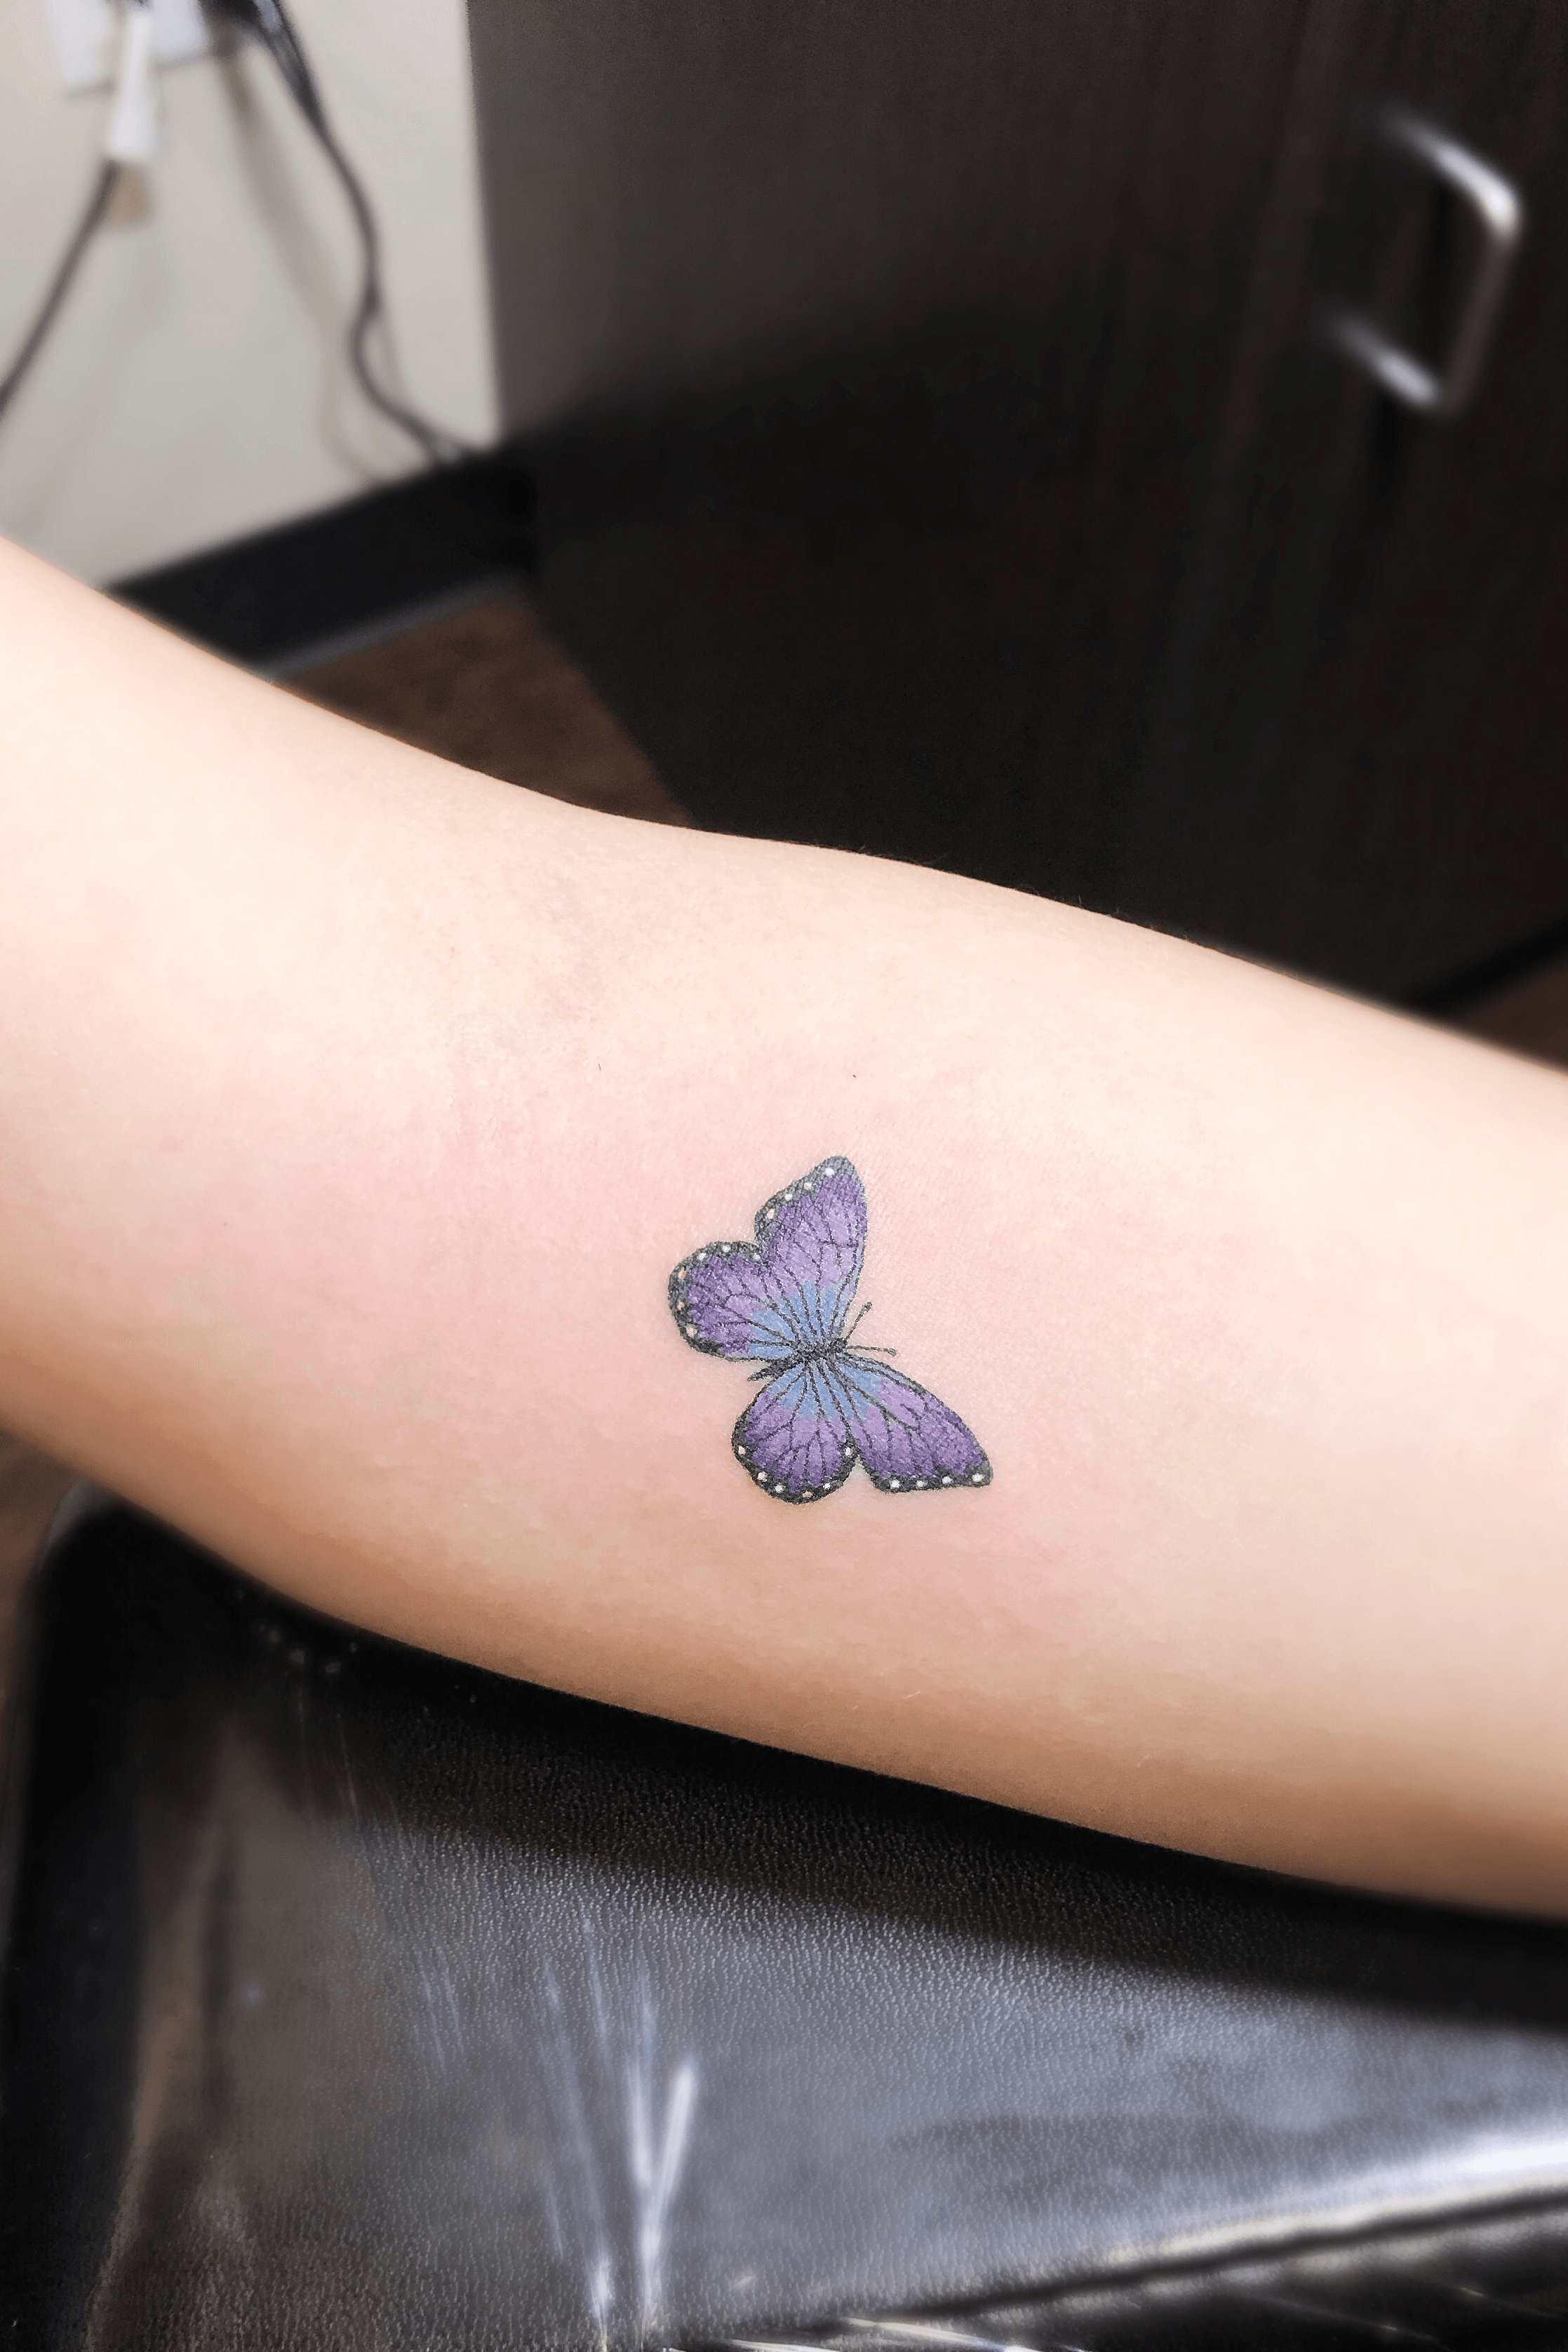 Tattoo tagged with flower small micro violet tiny ankle little  nature soltattoo green illustrative  inkedappcom